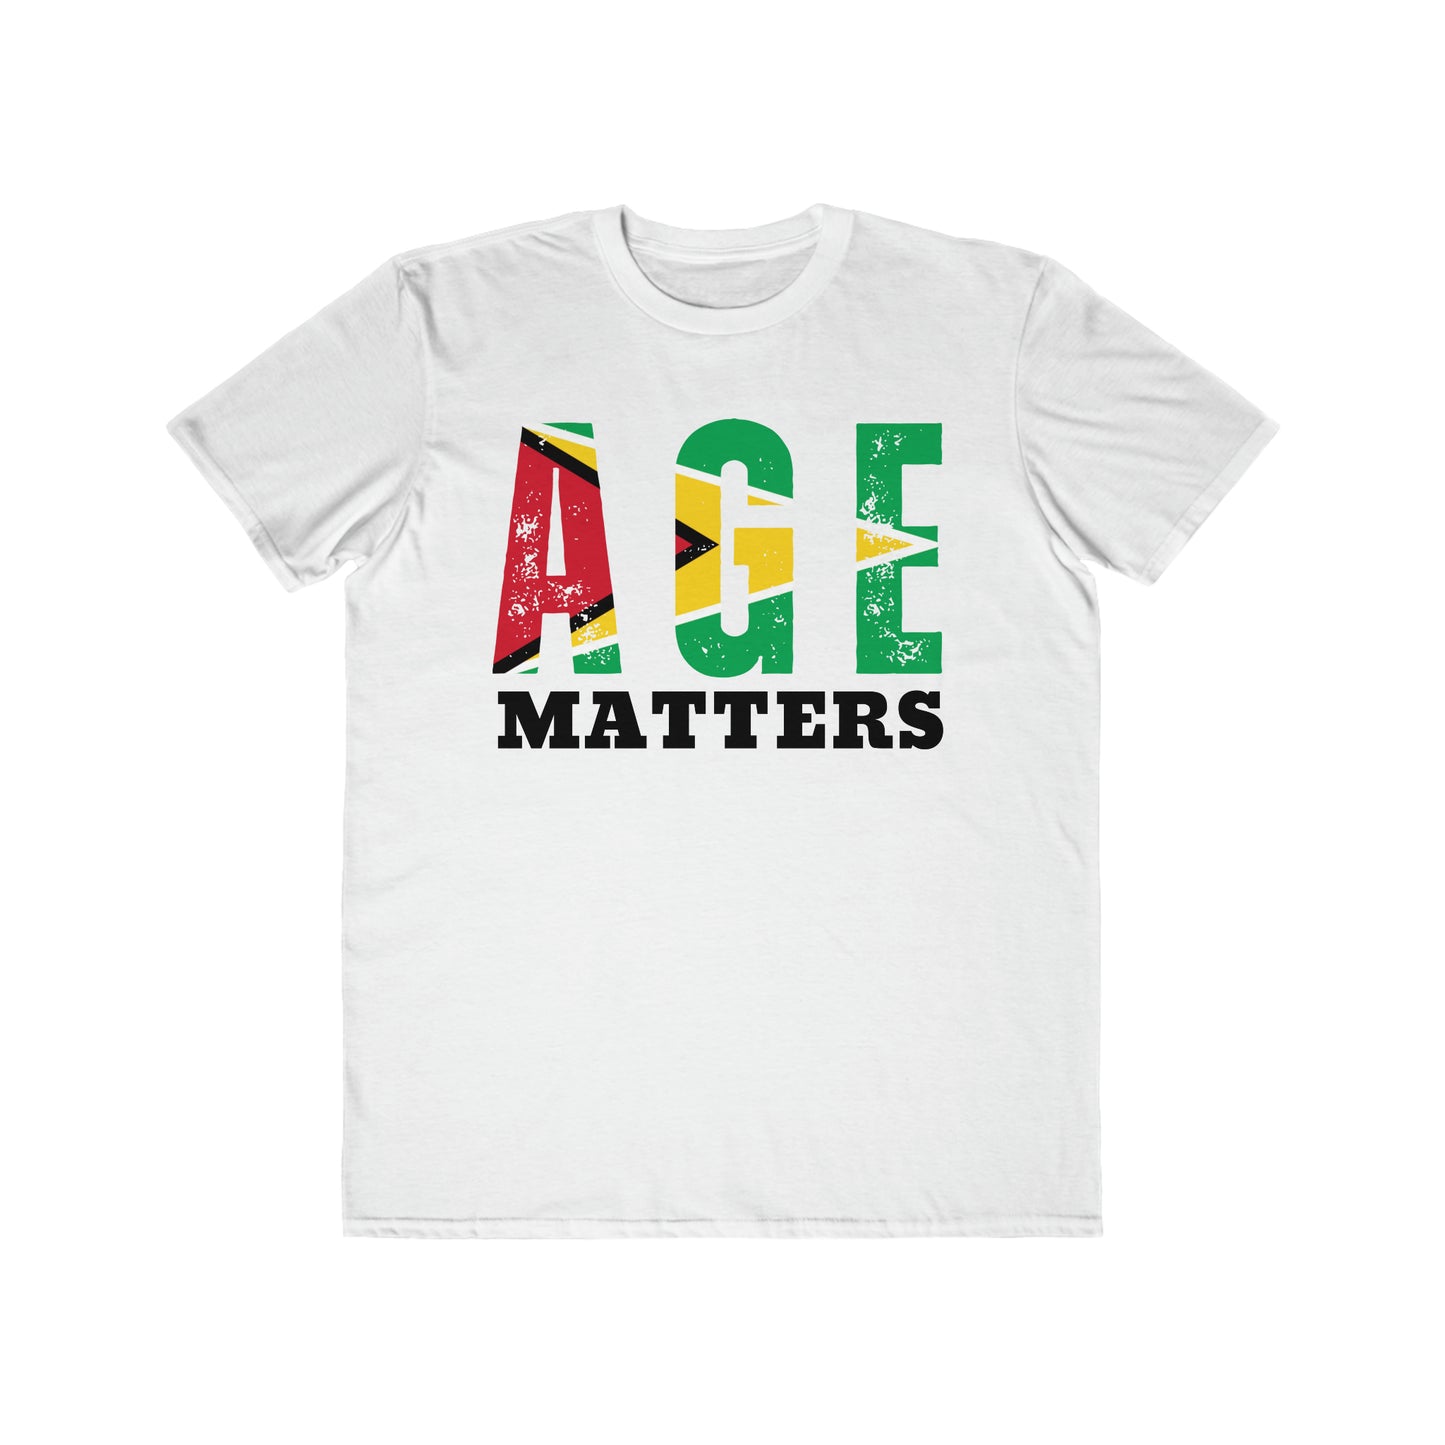 Age Matters Sexual Abuse Awareness Men's Lightweight Fashion Tee by Guyanese Swag